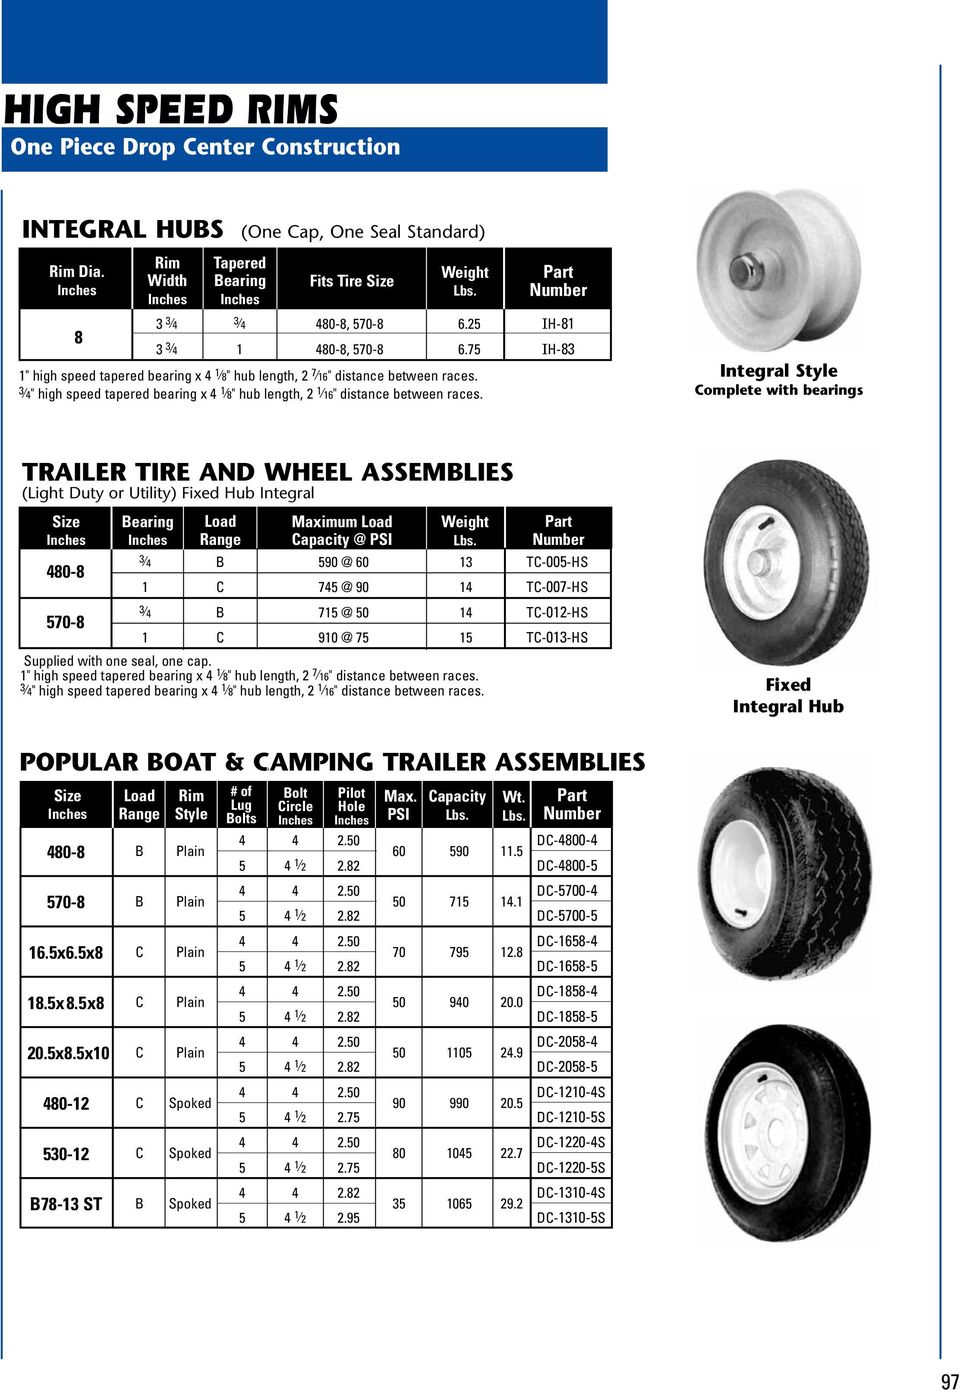 Integral Style Complete with bearings Trailer Tire and Wheel Assemblies (Light Duty or Utility) Fixed Integral 480-8 570-8 Bearing Load Maximum Load Range Capacity @ PSI 3 4 B 590 @ 60 13 TC-005-HS 1